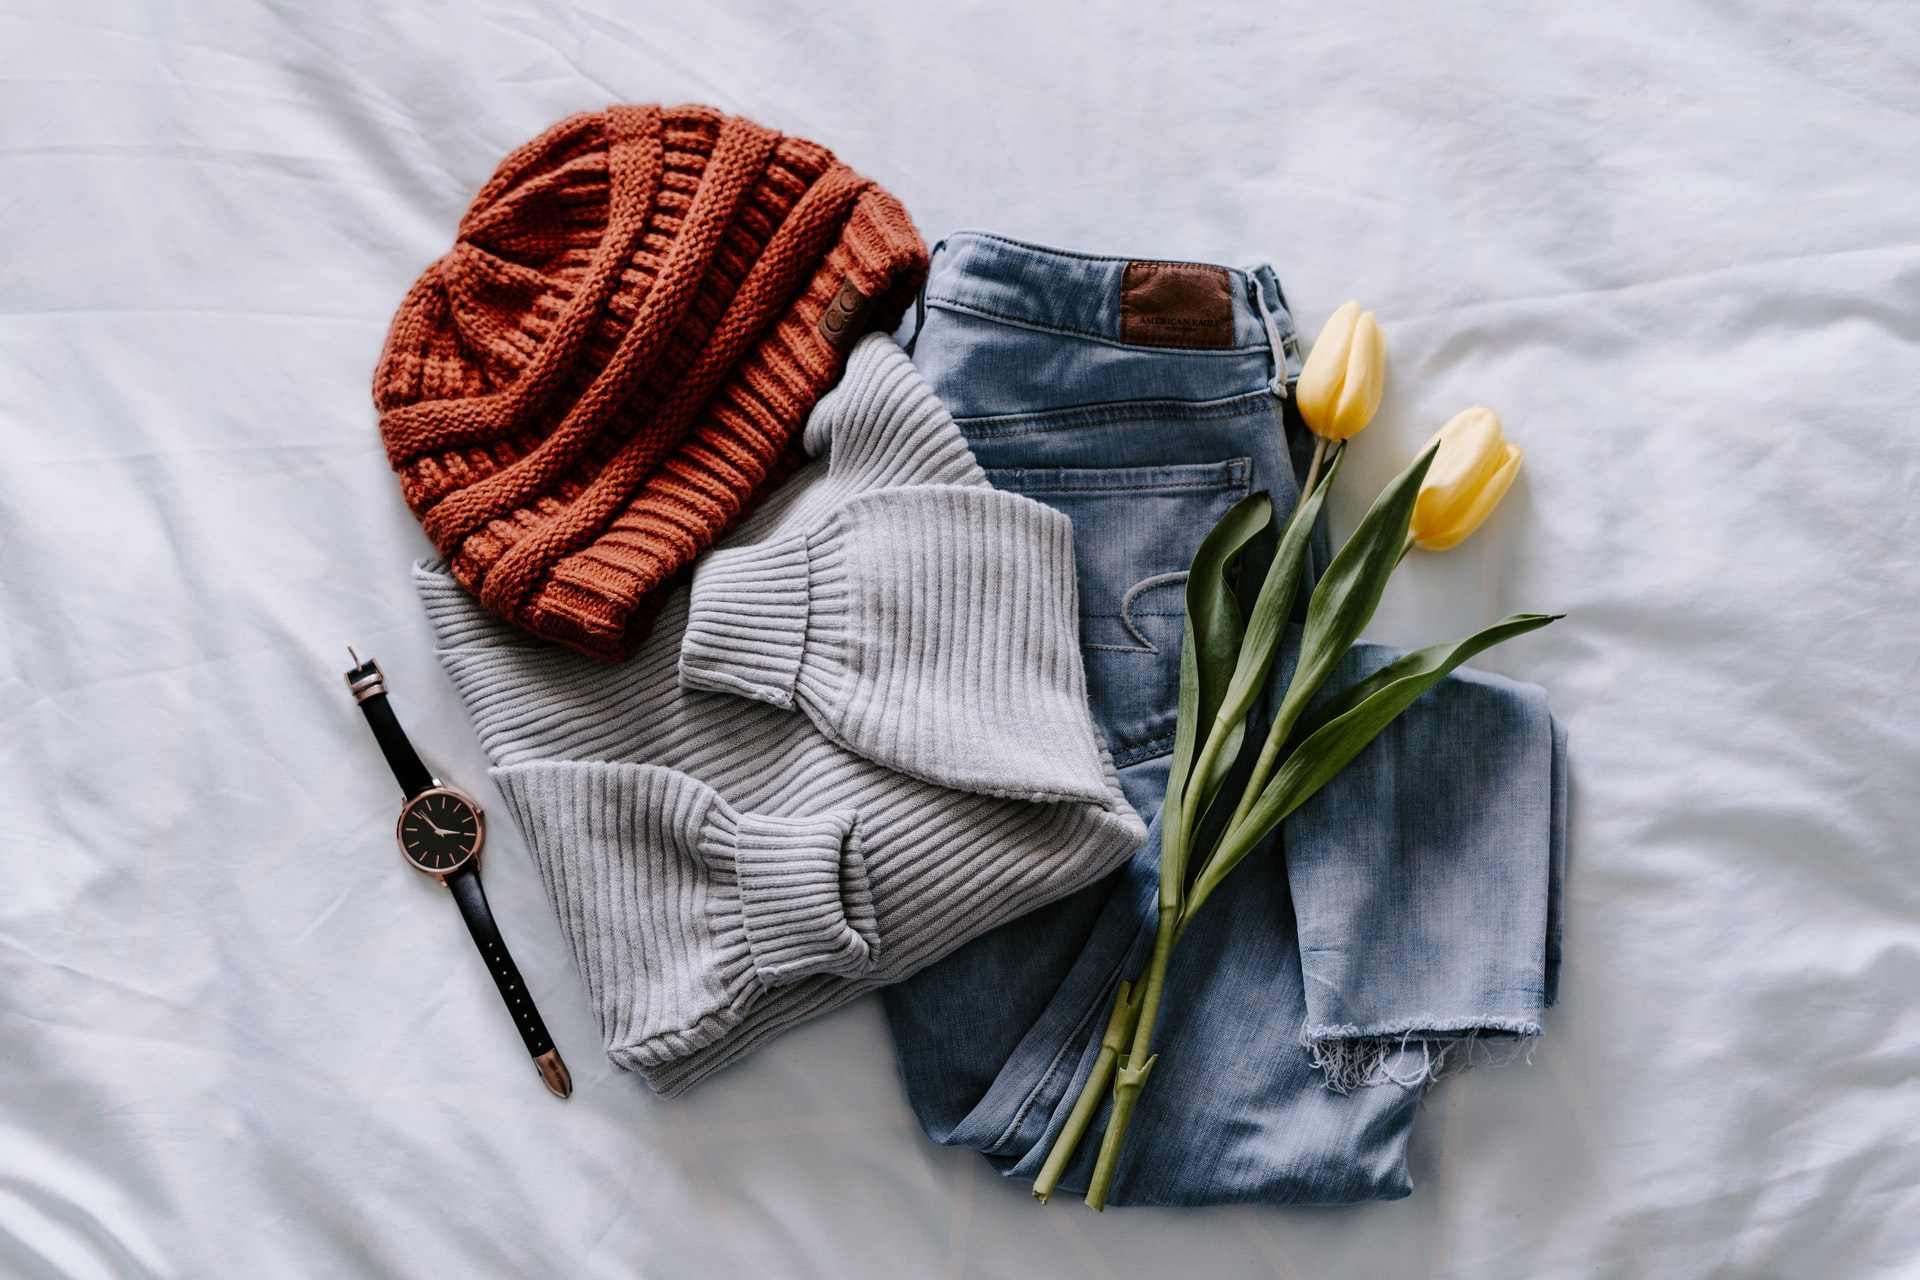 orange-knit-beanie-grey-jumper-blue-pair-of-jeans-and-watch-on-white-bed-travel-capsule-wardrobe